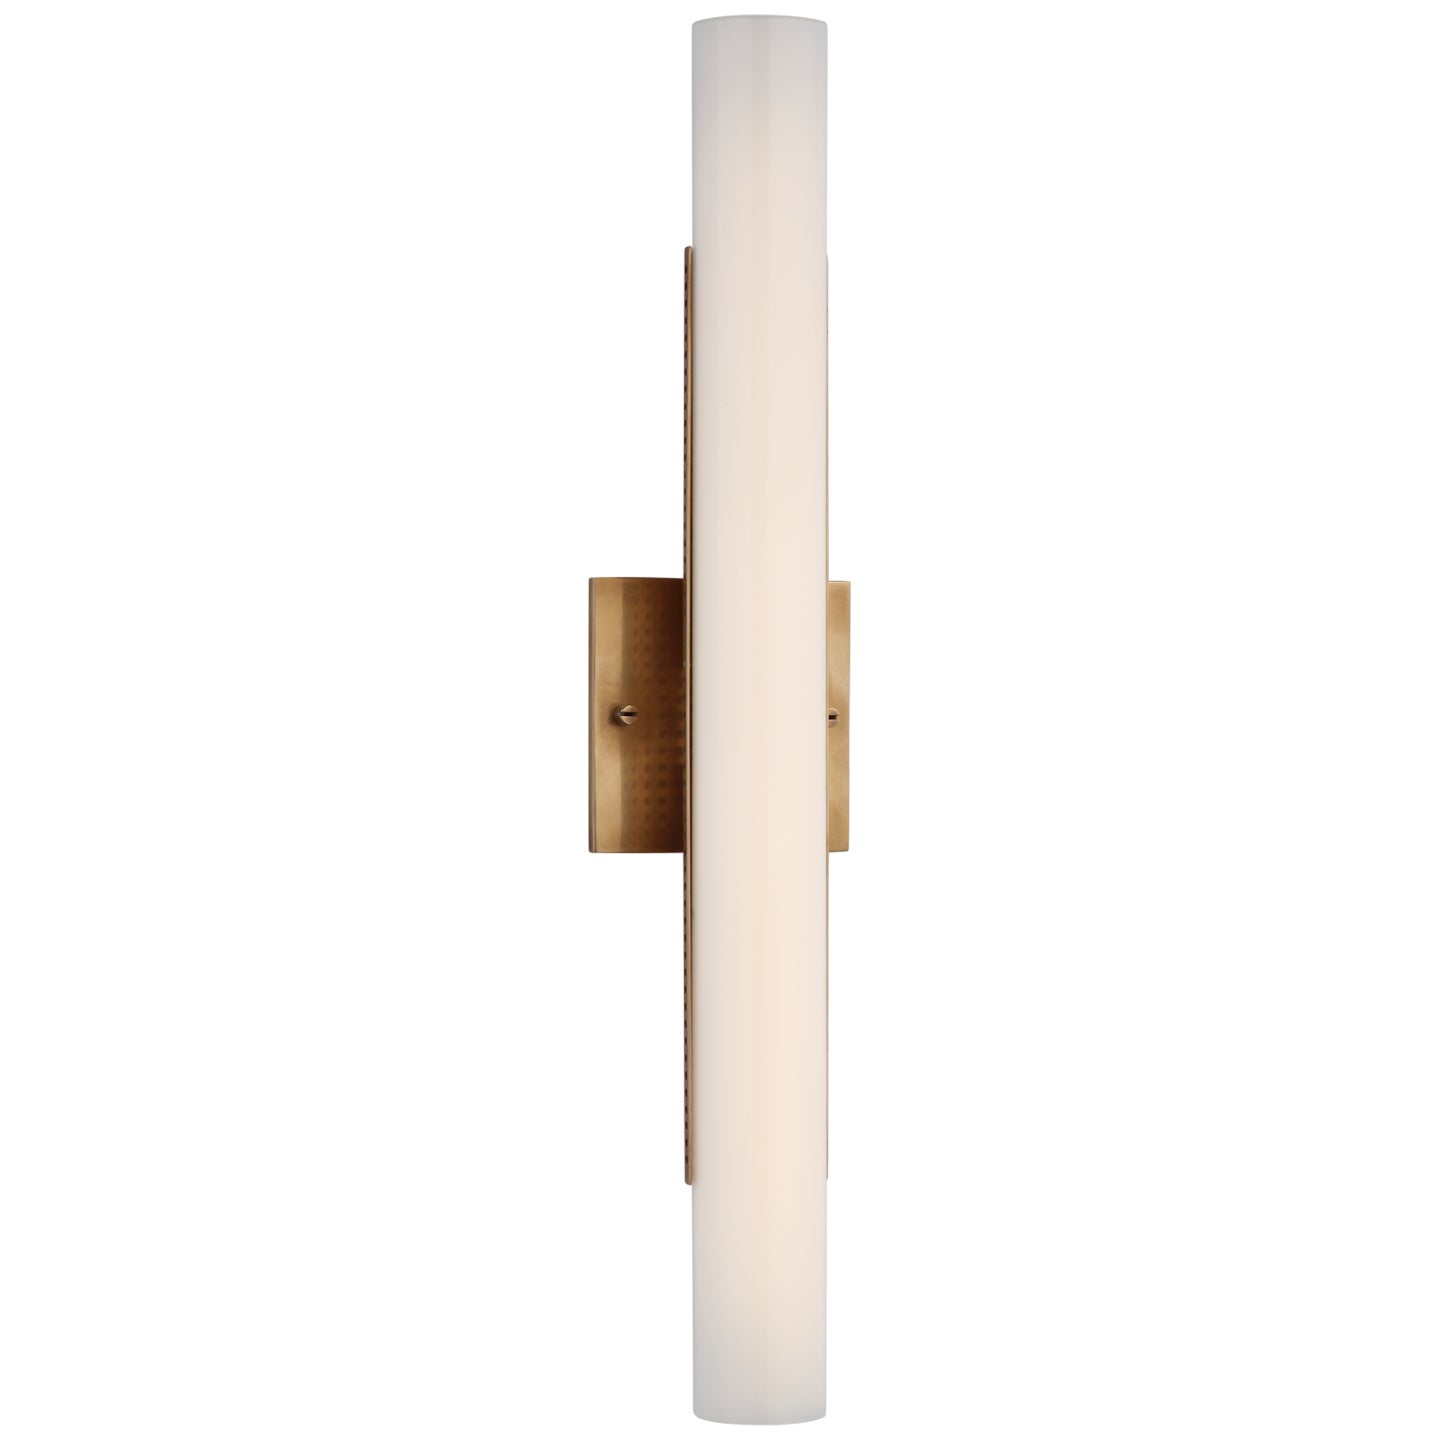 Load image into Gallery viewer, Visual Comfort Signature - KW 2223AB-WG - LED Bath Light - Precision - Antique-Burnished Brass
